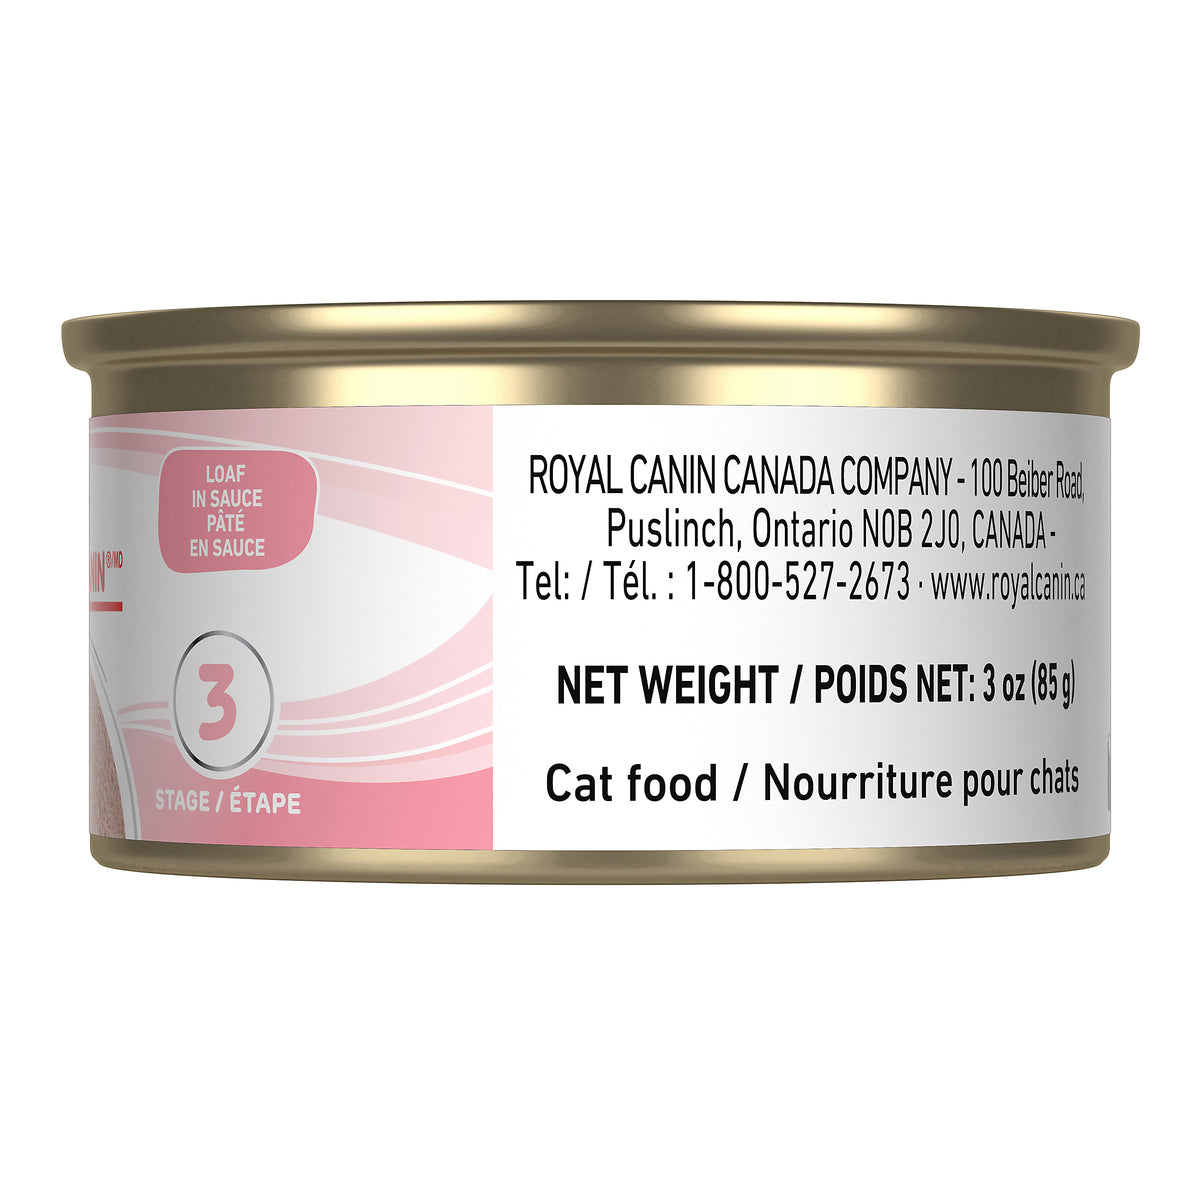 Royal Canin Kitten Loaf In Sauce Canned Cat Food (85g)